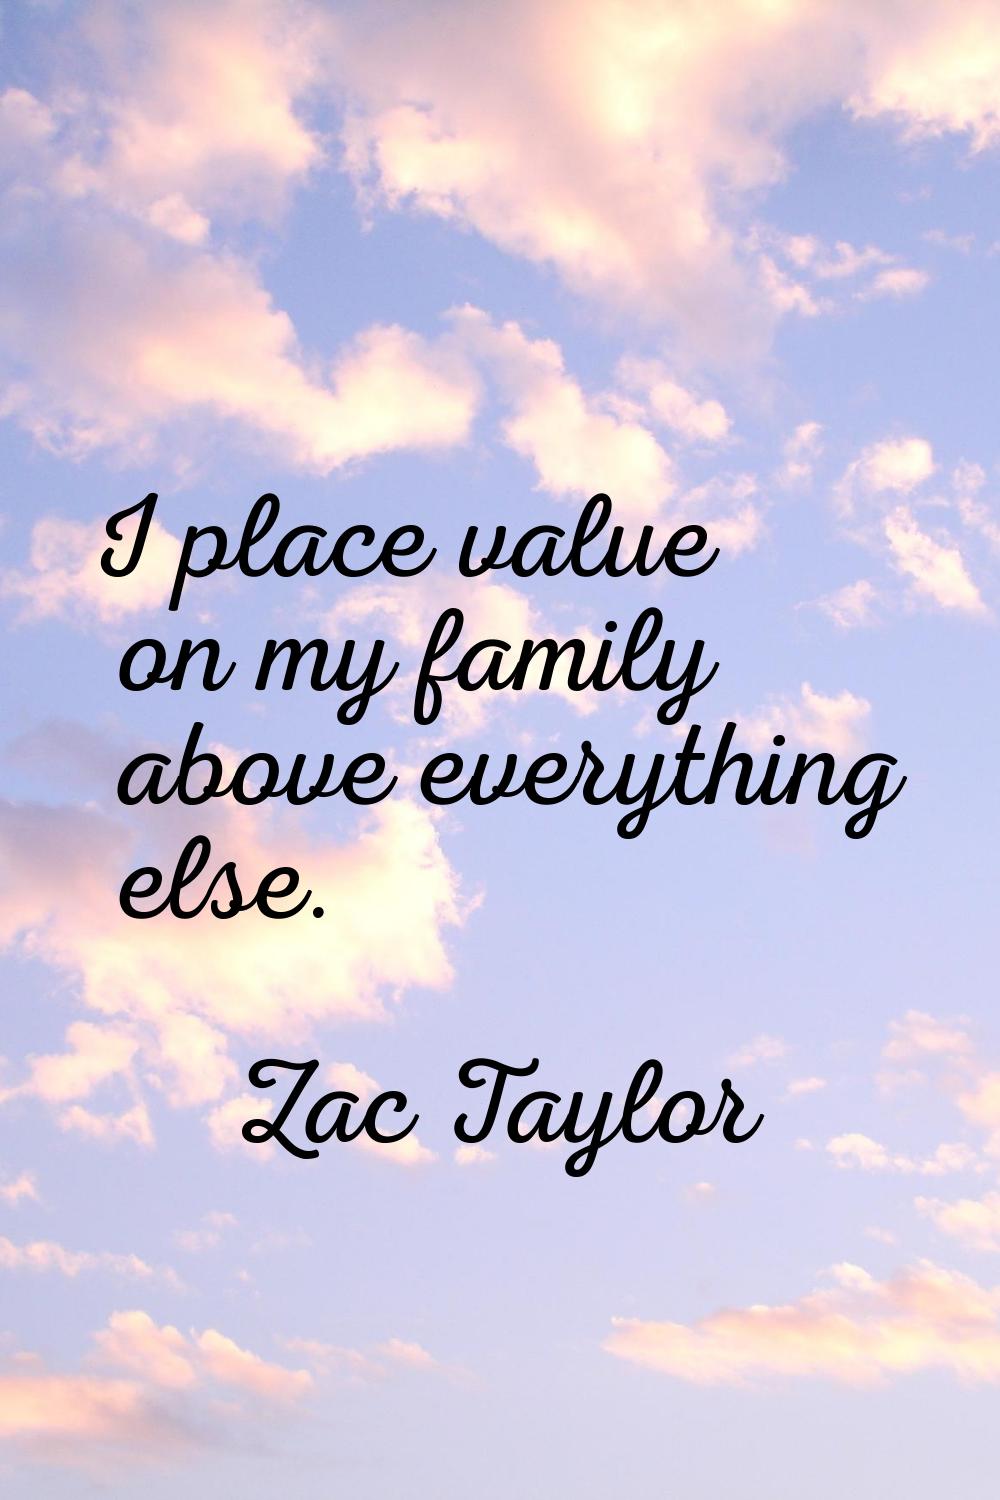 I place value on my family above everything else.